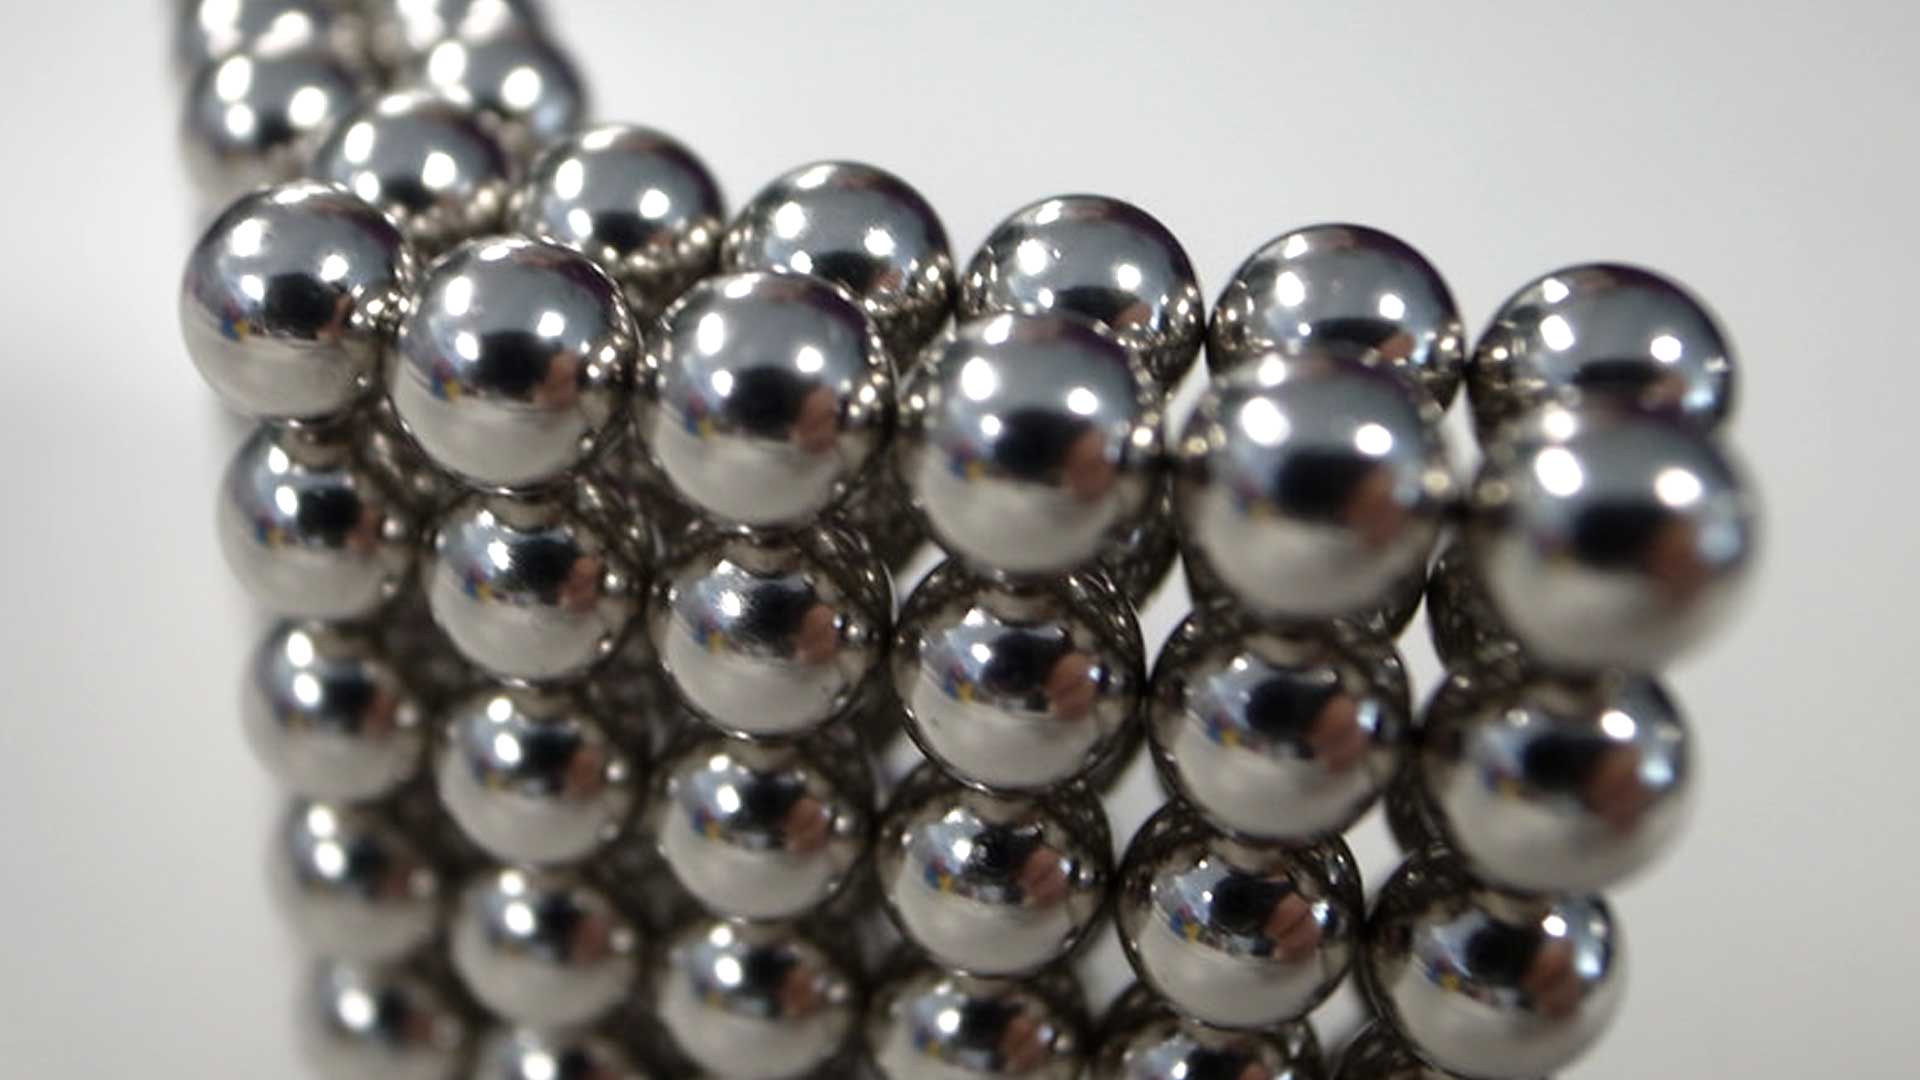 Buckyballs: The Amazing Rare Earth Magnet Desk Toy